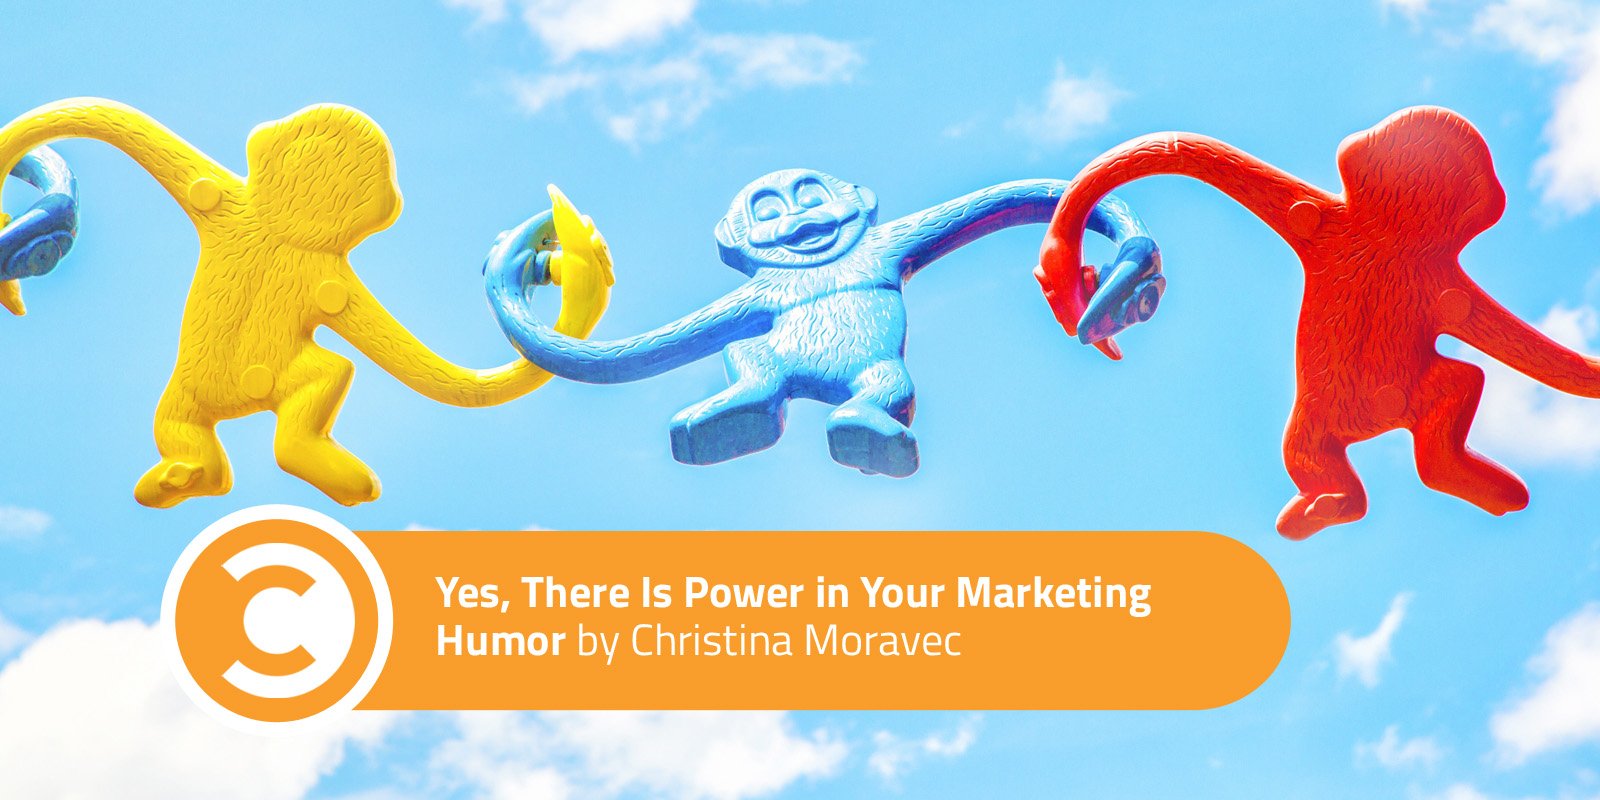 Yes, There Is Power in Your Marketing Humor